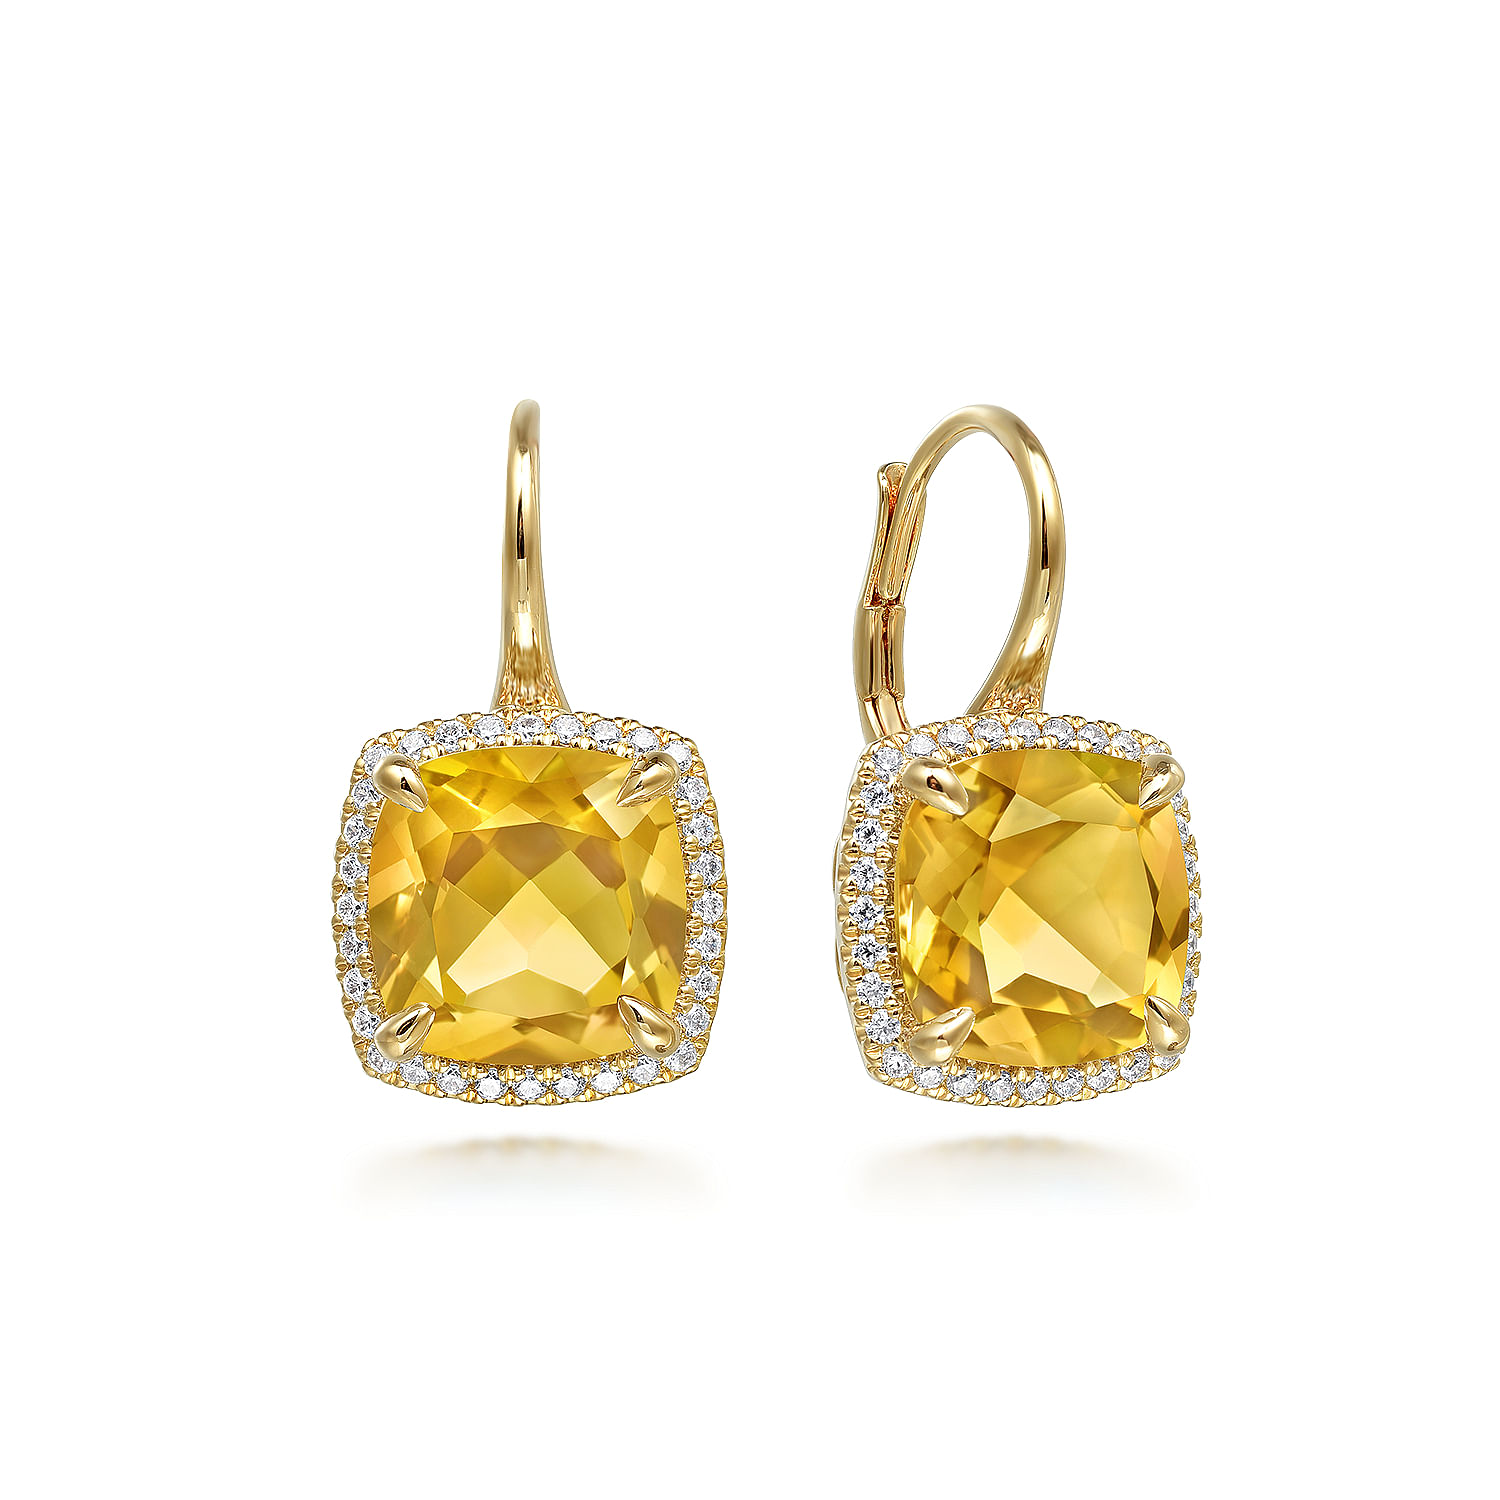 Gabriel - 14K Yellow Gold Diamond and Citrine Cushion Cut Earrings With Flower Pattern J-Back